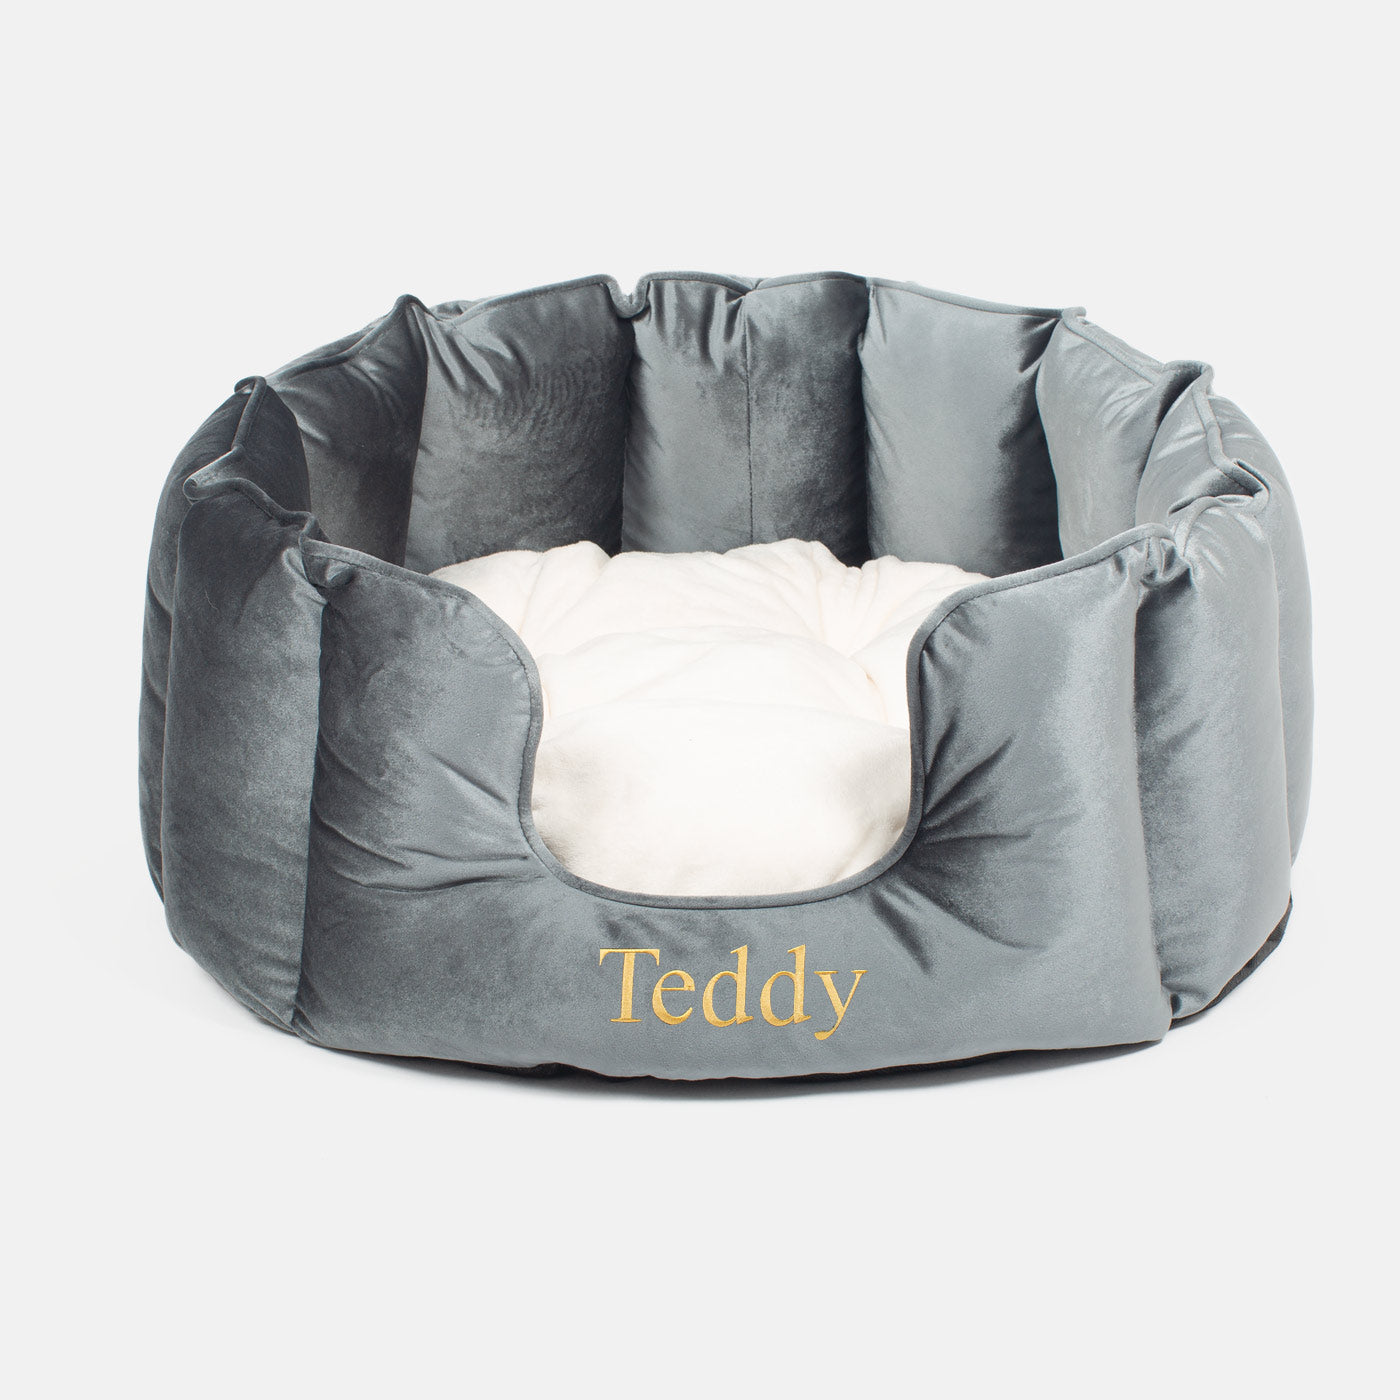 Discover Our Luxurious High Wall Velvet Bed For Cats, Featuring inner pillow with plush teddy fleece on one side To Craft The Perfect Cats Bed In Stunning Elephant Velvet! Available To Personalise Now at Lords & Labradors    